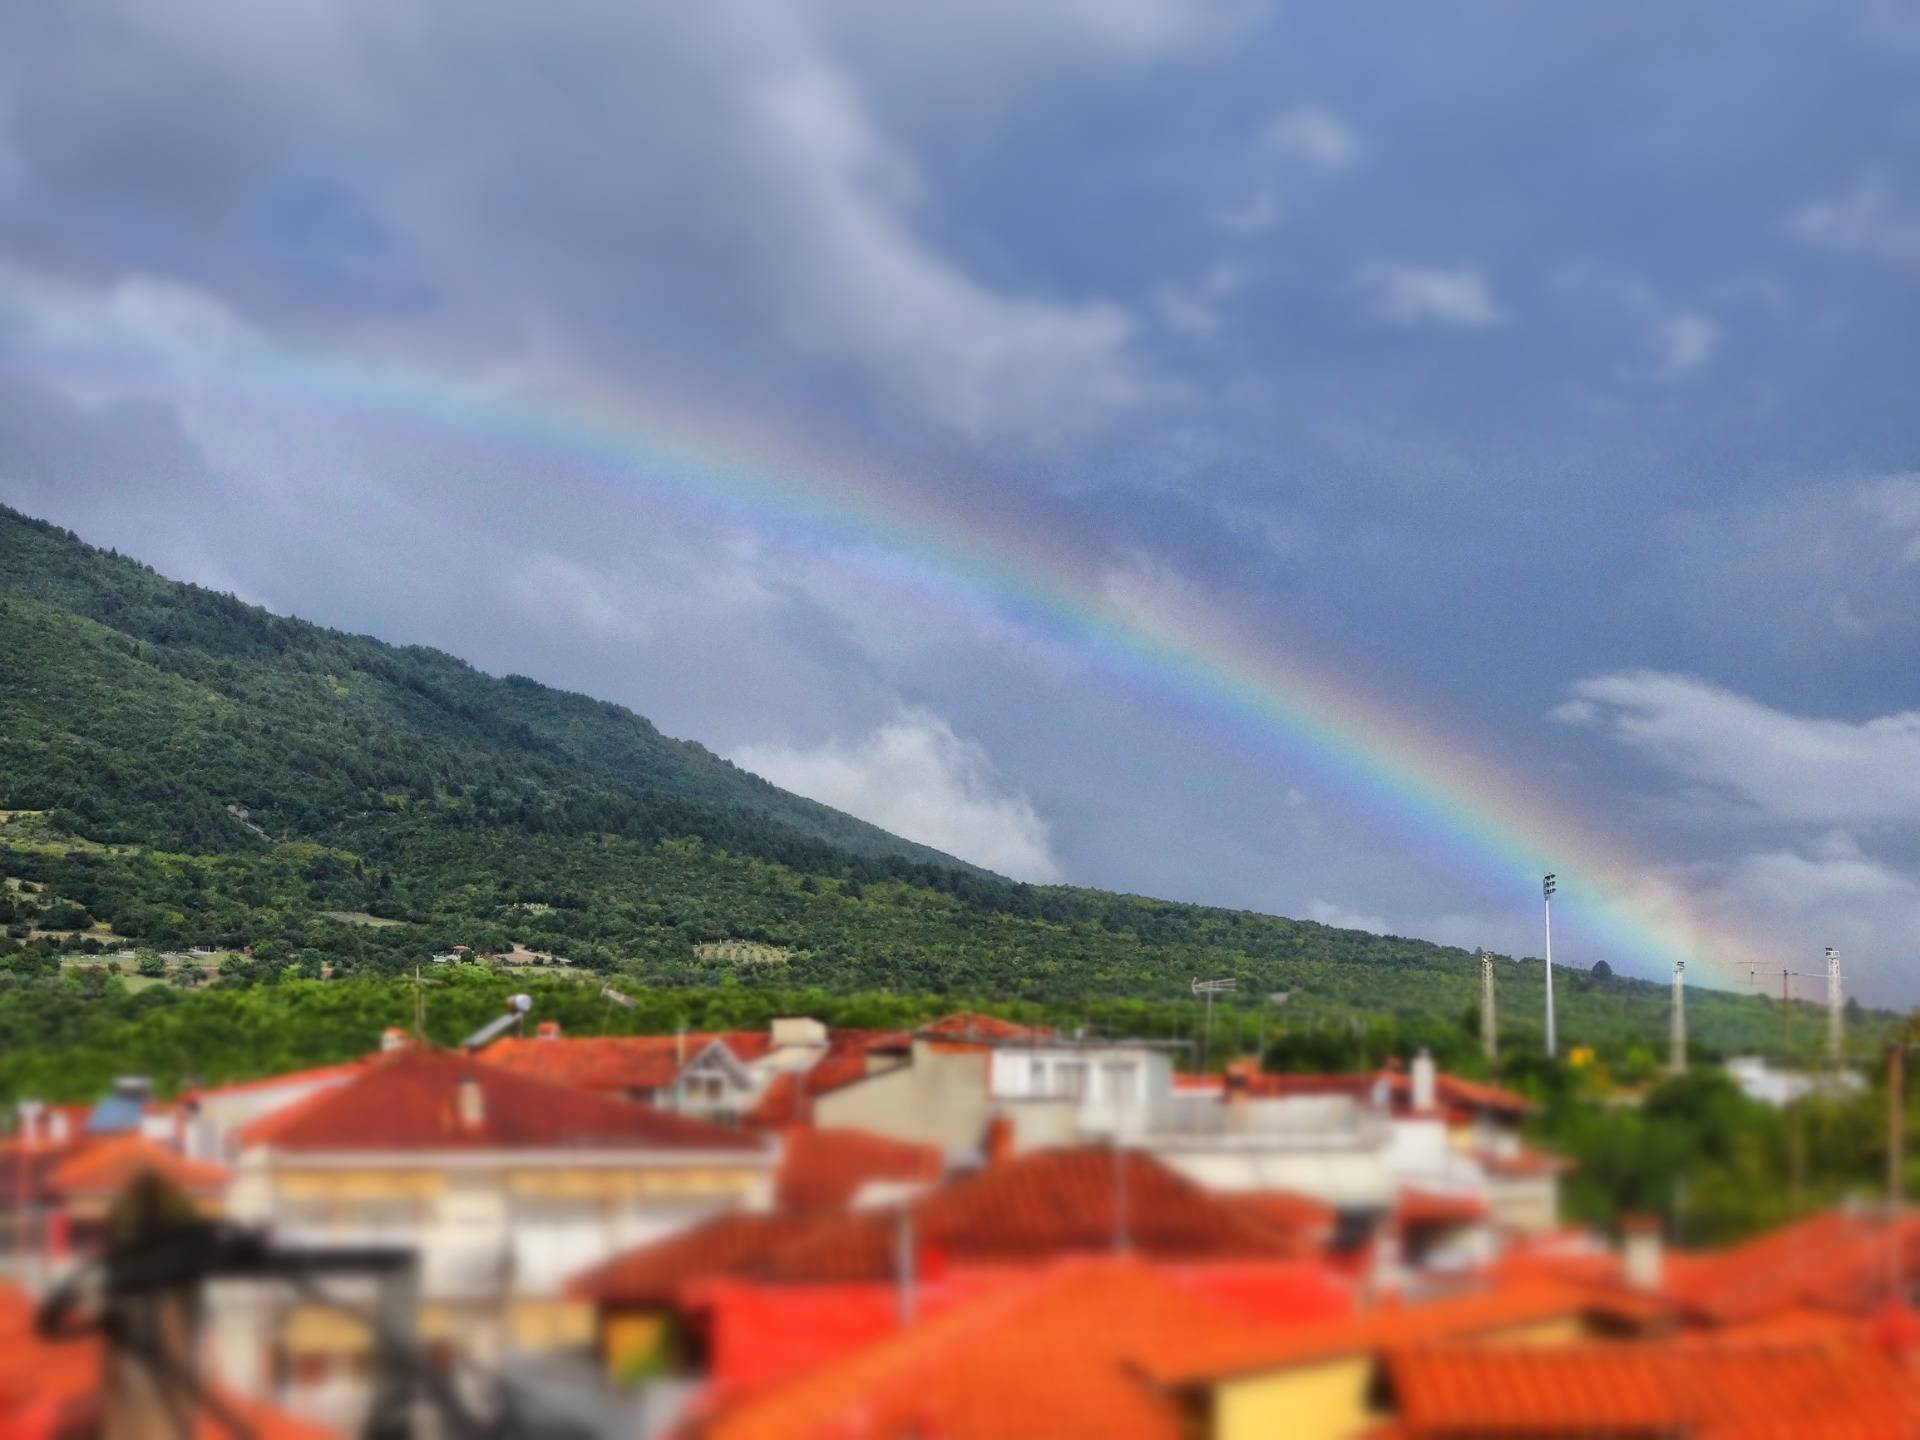 And a rainbow over Litochoro